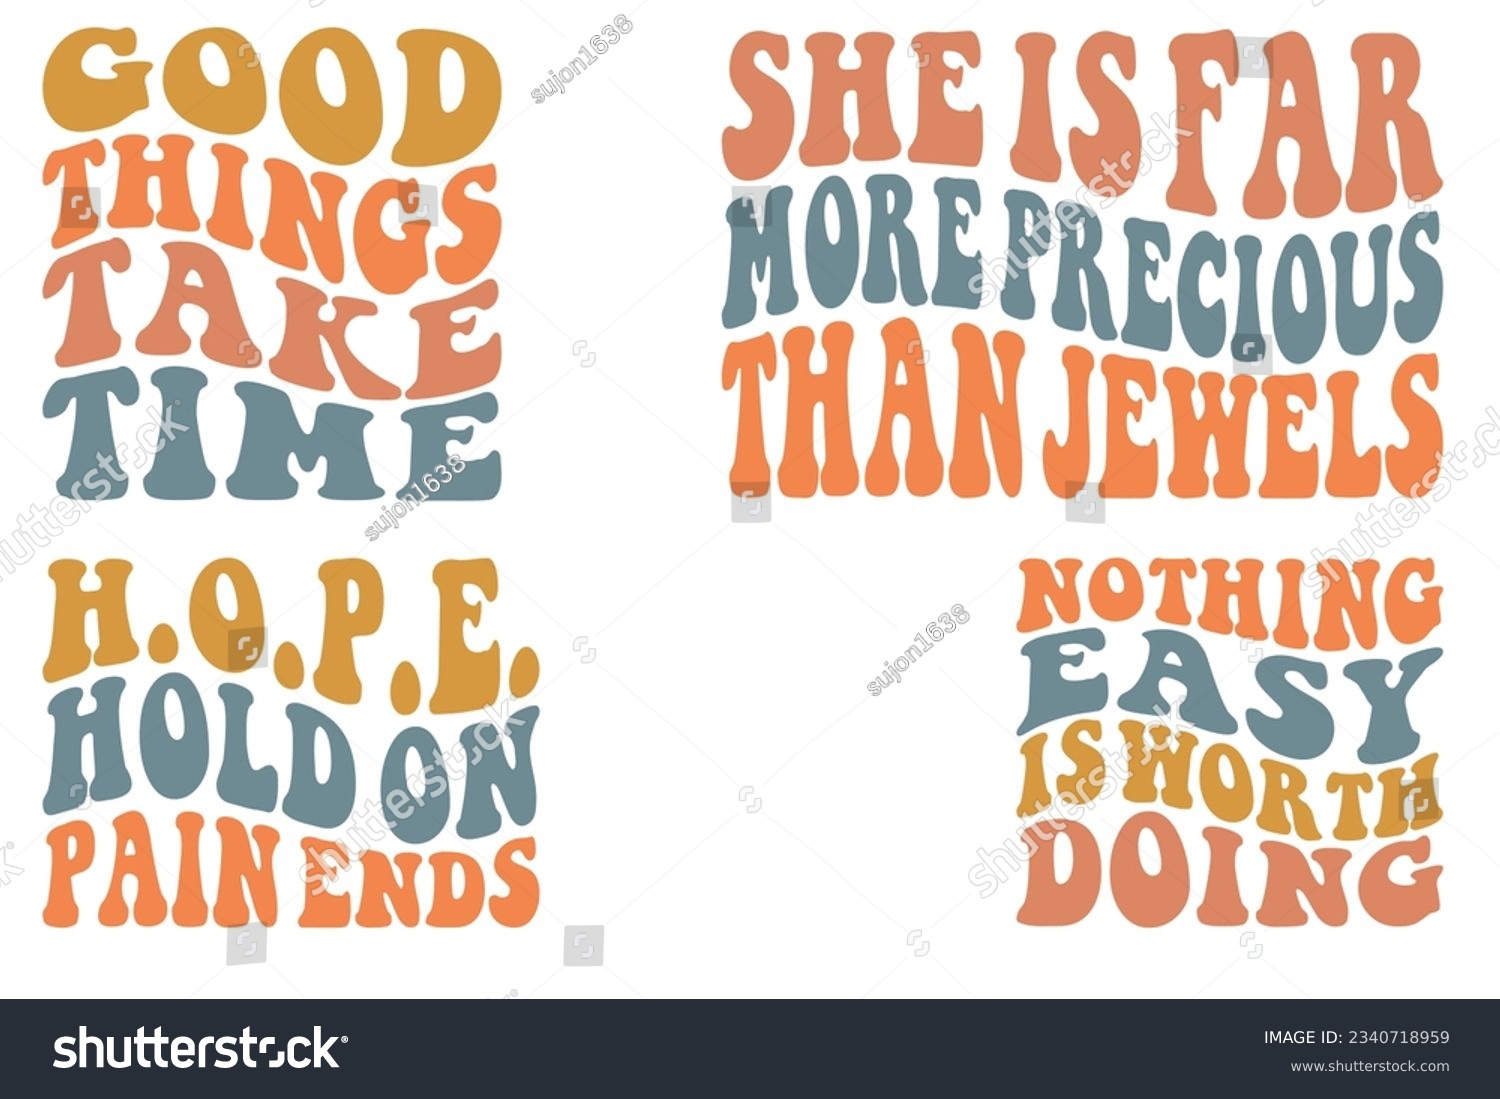 SVG of Good things take time, she is far more precious than jewels, H.O.P hold on pain ends retro wavy SVG t-shirt svg